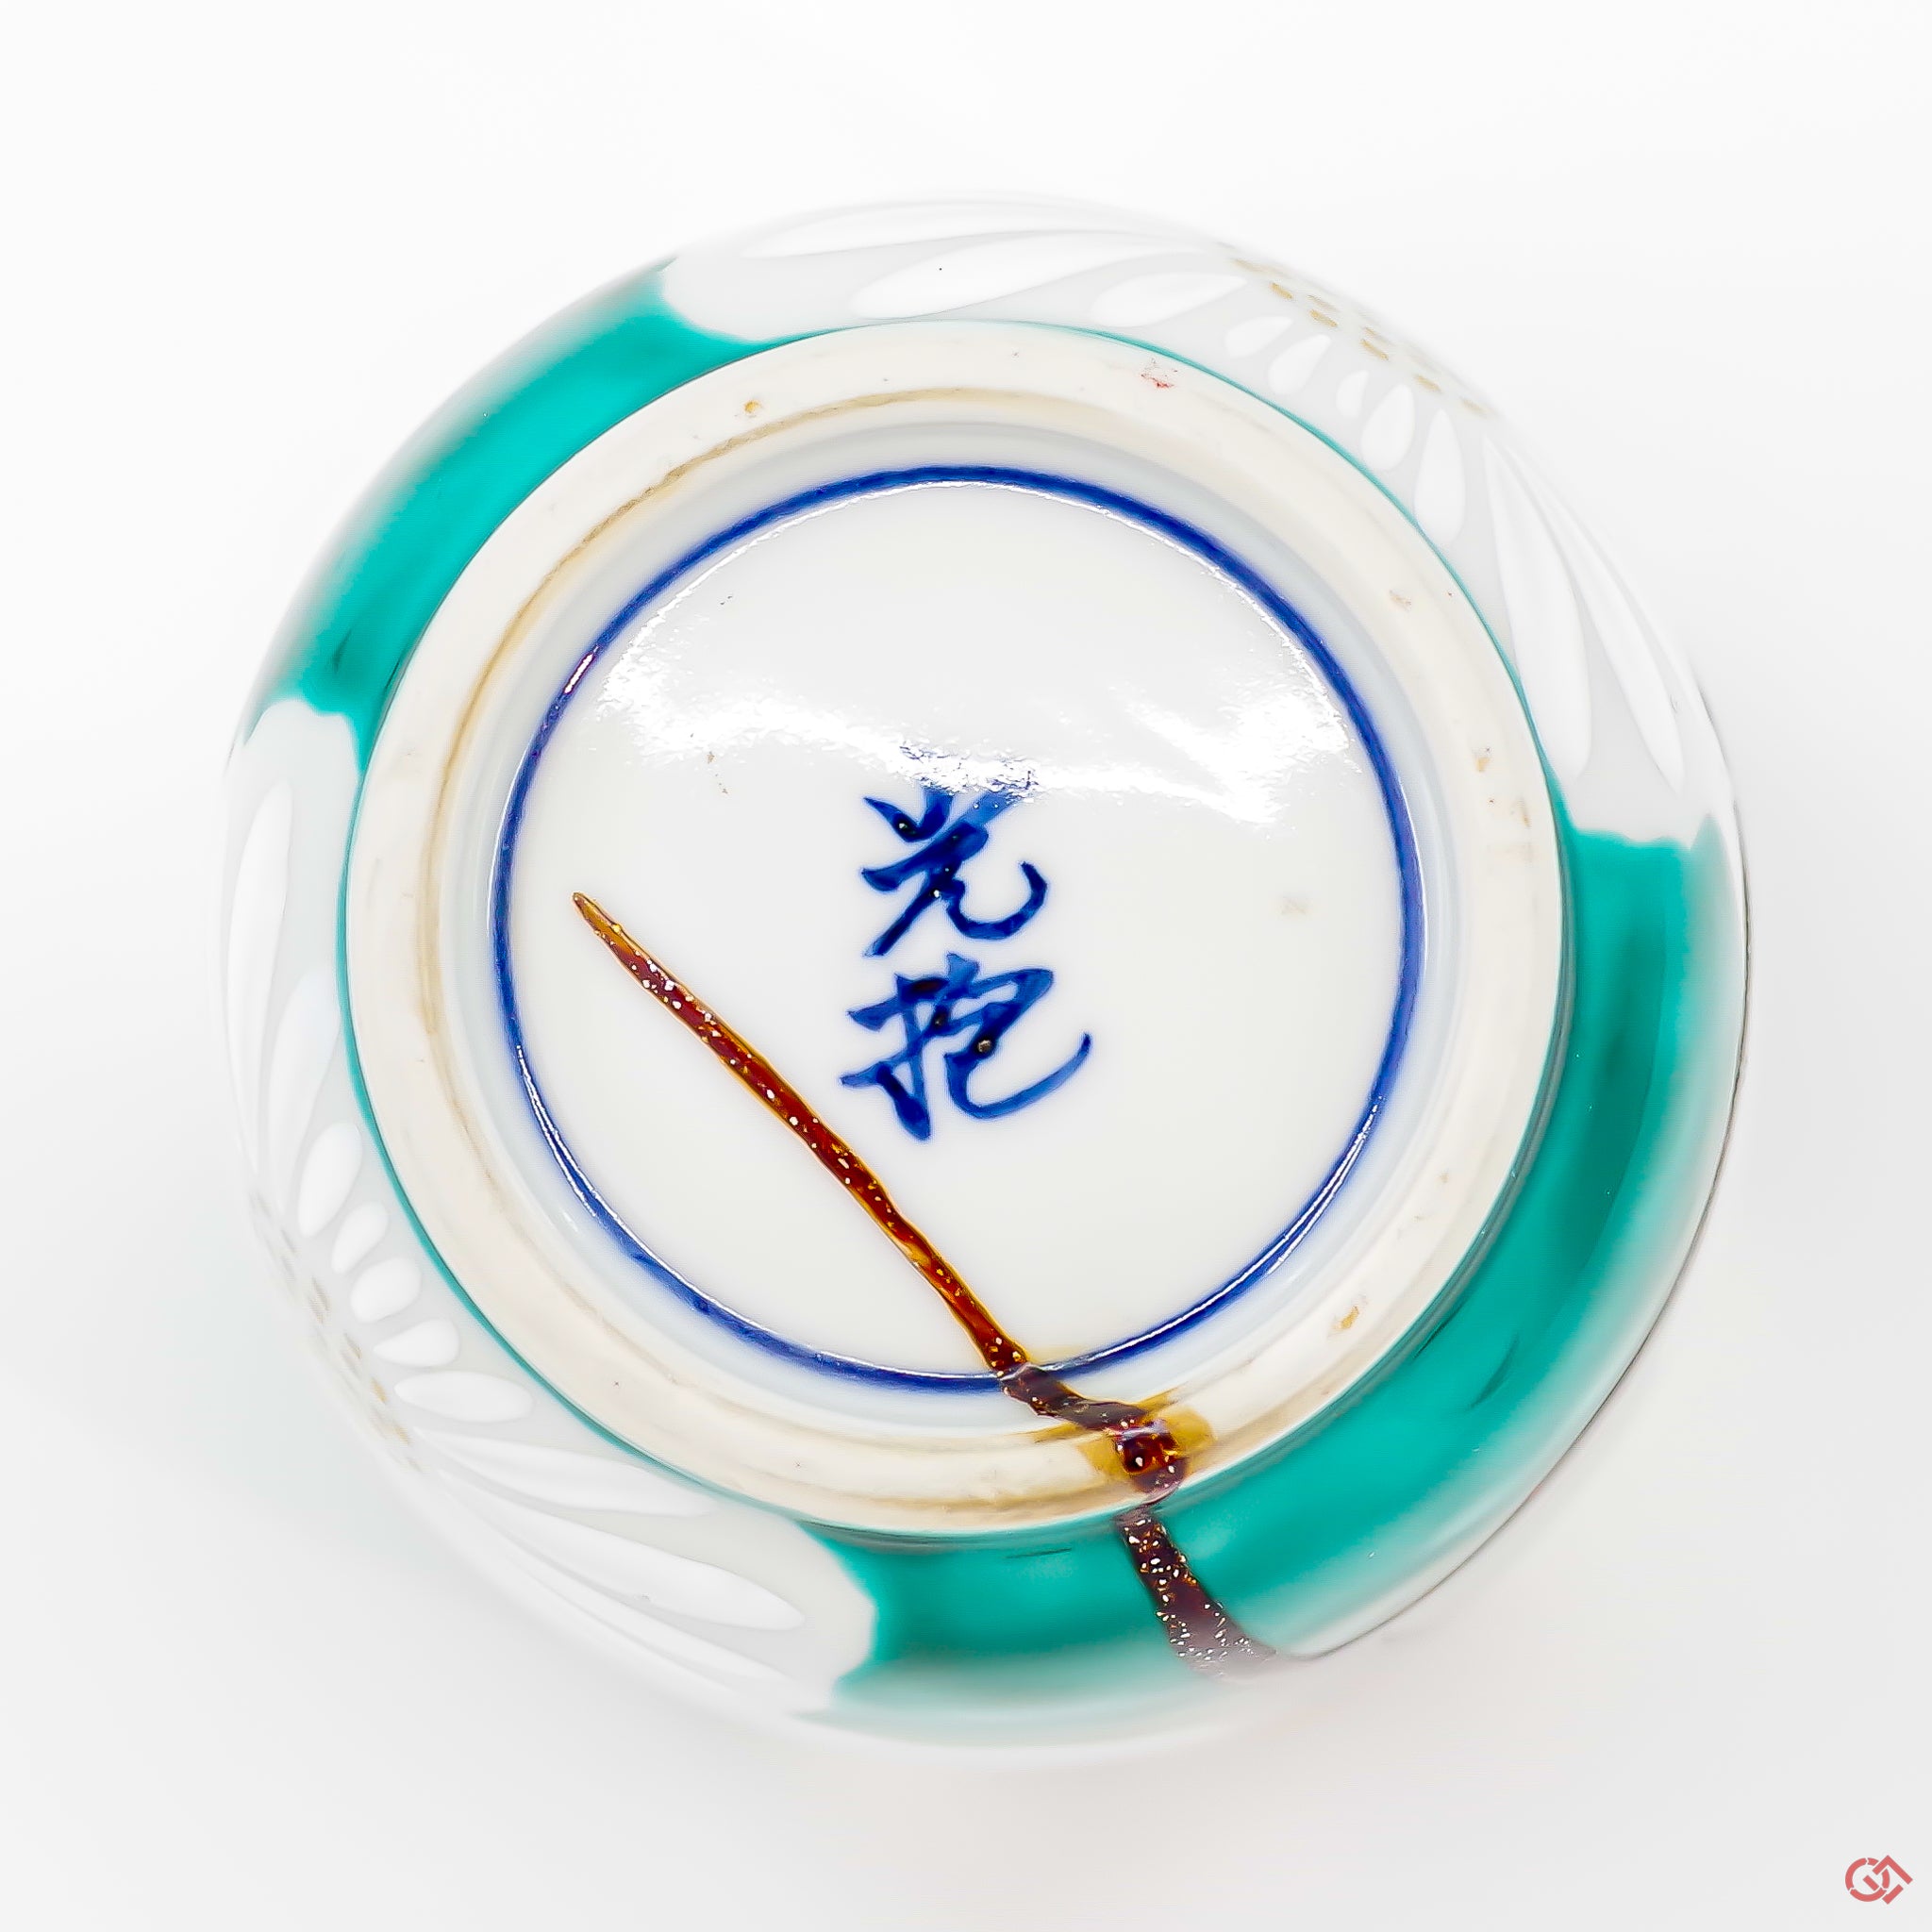 A photo of the bottom side of an authentic Kintsugi pottery piece, showing its overall design and features.